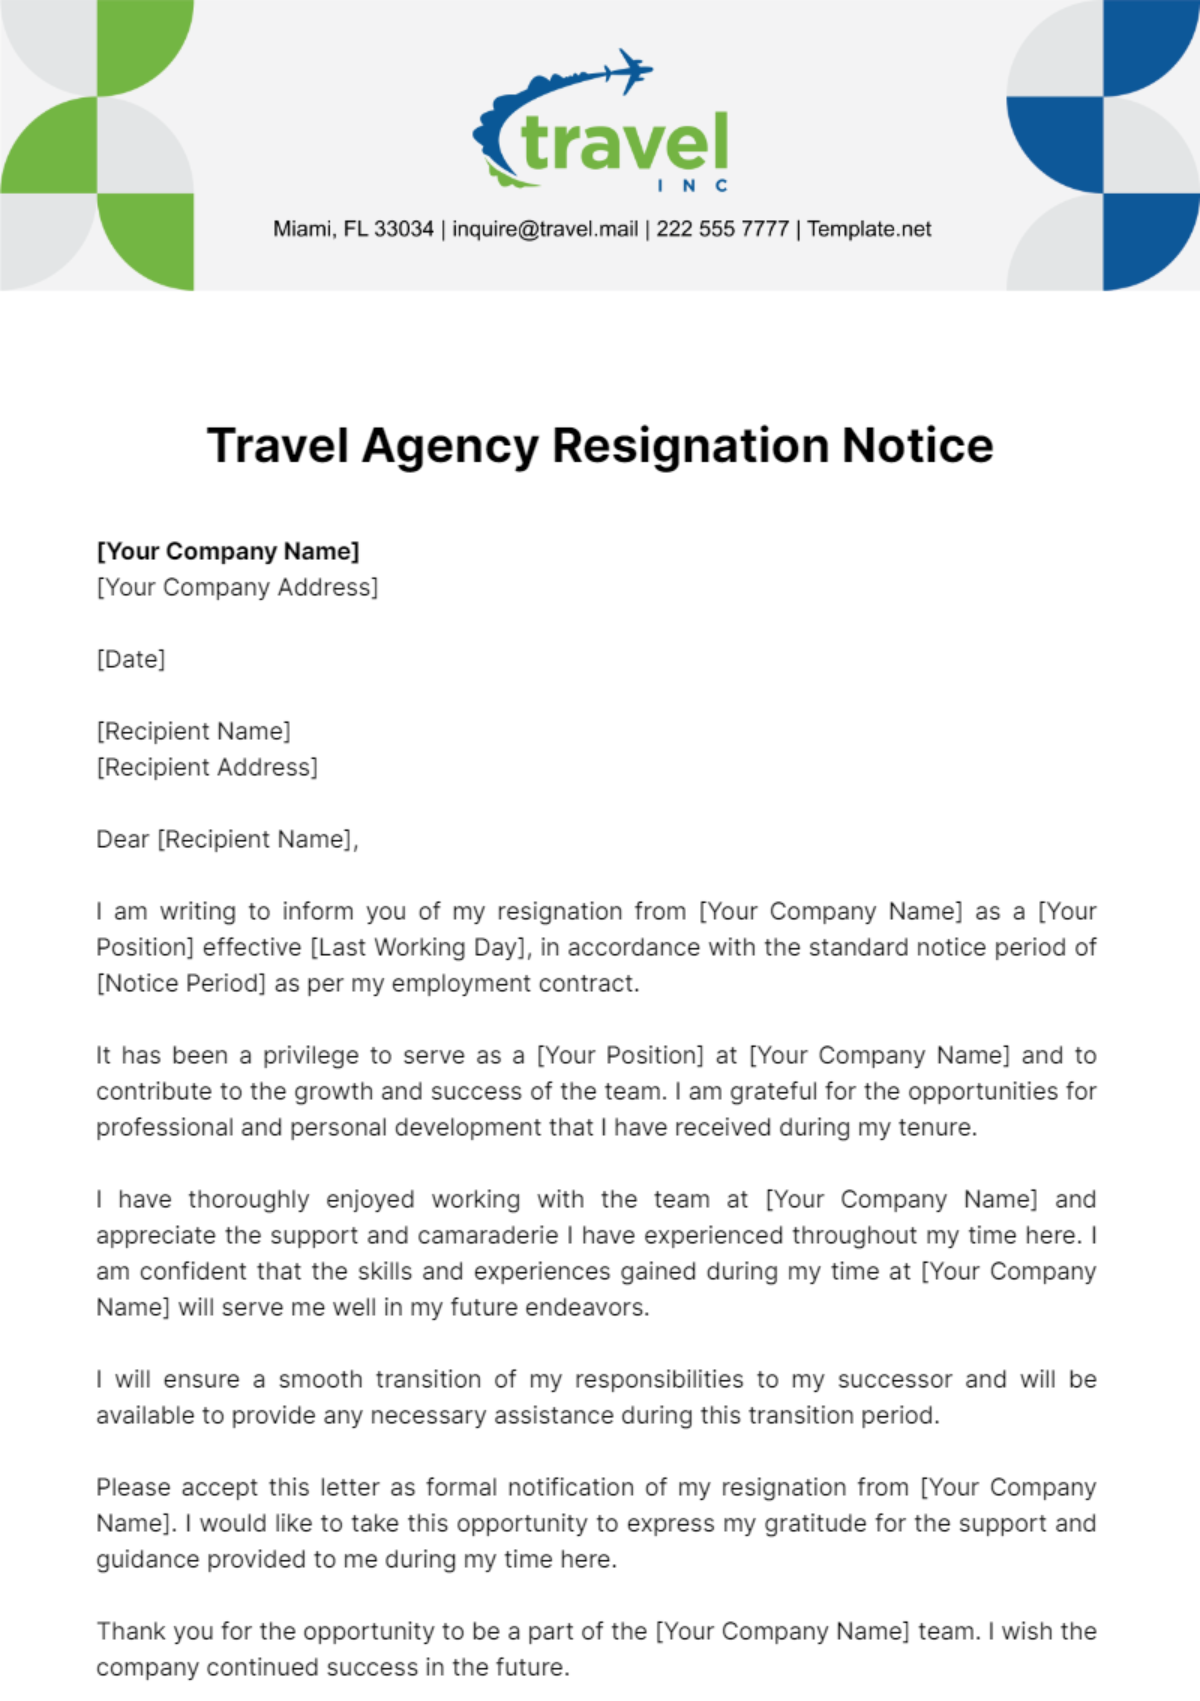 Free Travel Agency Resignation Notice Template